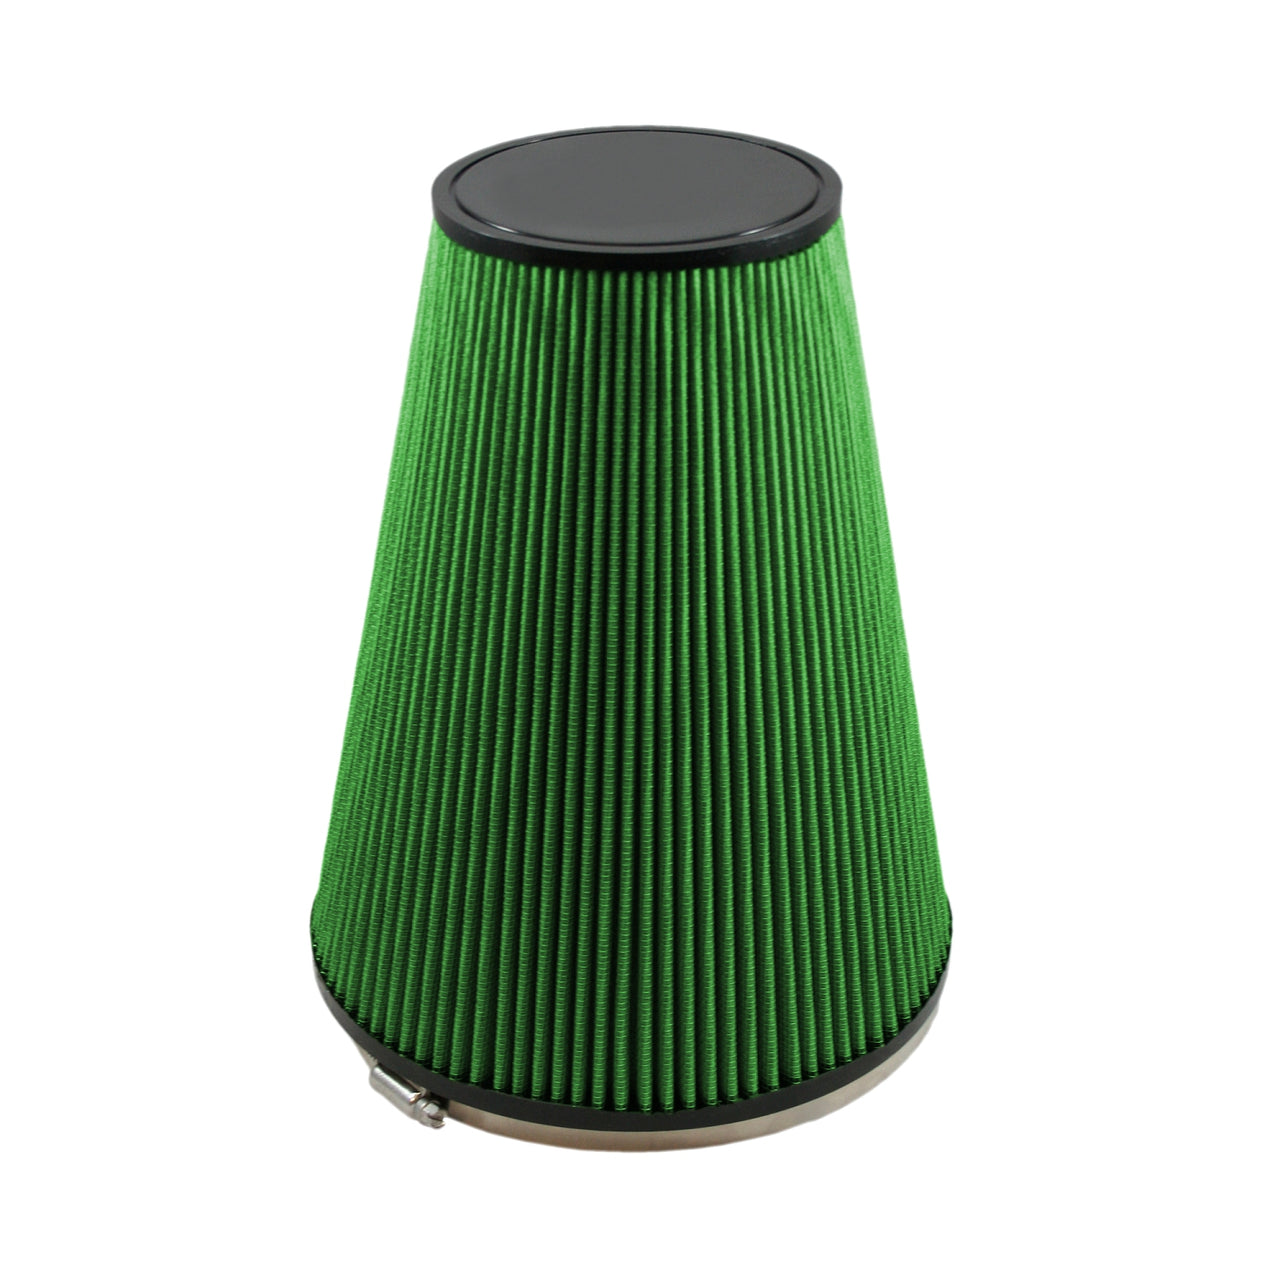 Green Filter Cone Filter - ID 8in. / Base 9.5in. / Top 4in. / H 12in.